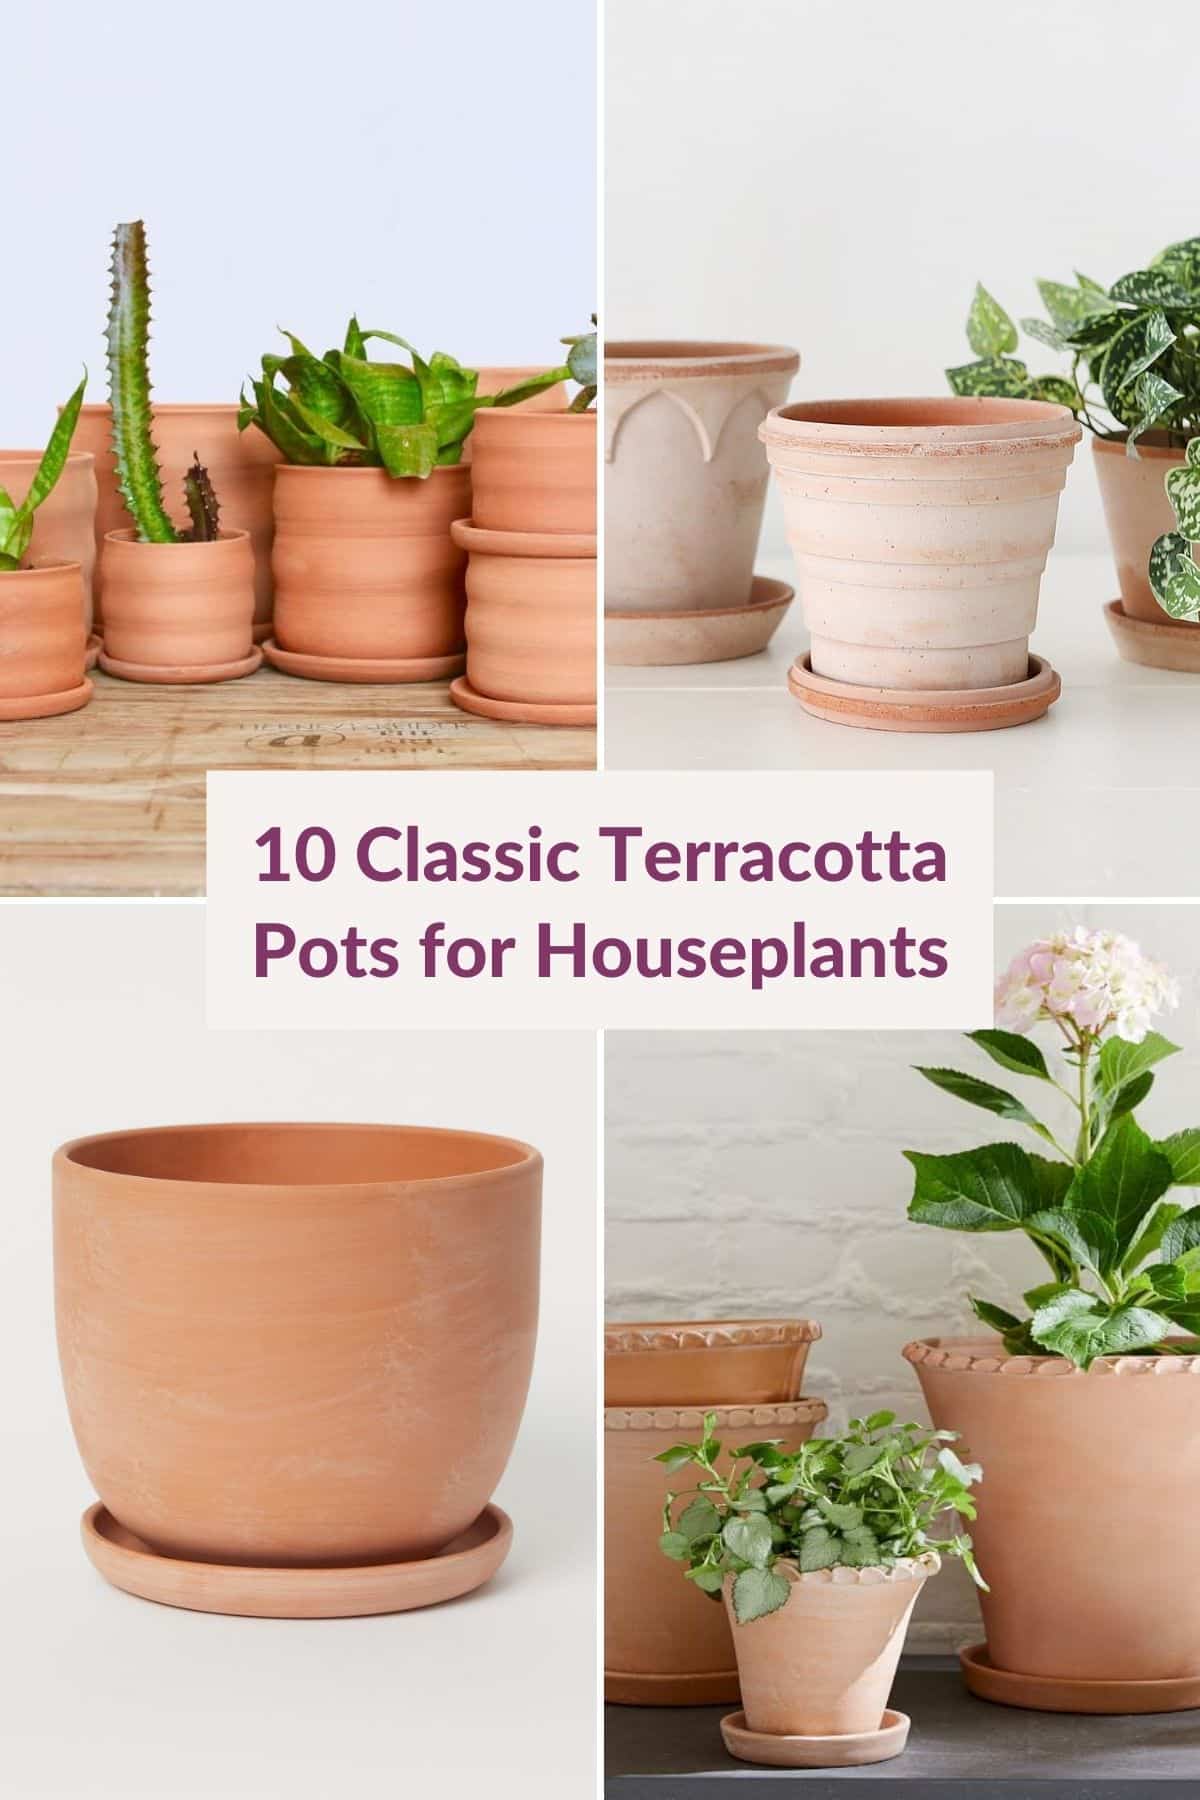 18 Classic Terracotta Pots for Houseplants You'll Love in 18